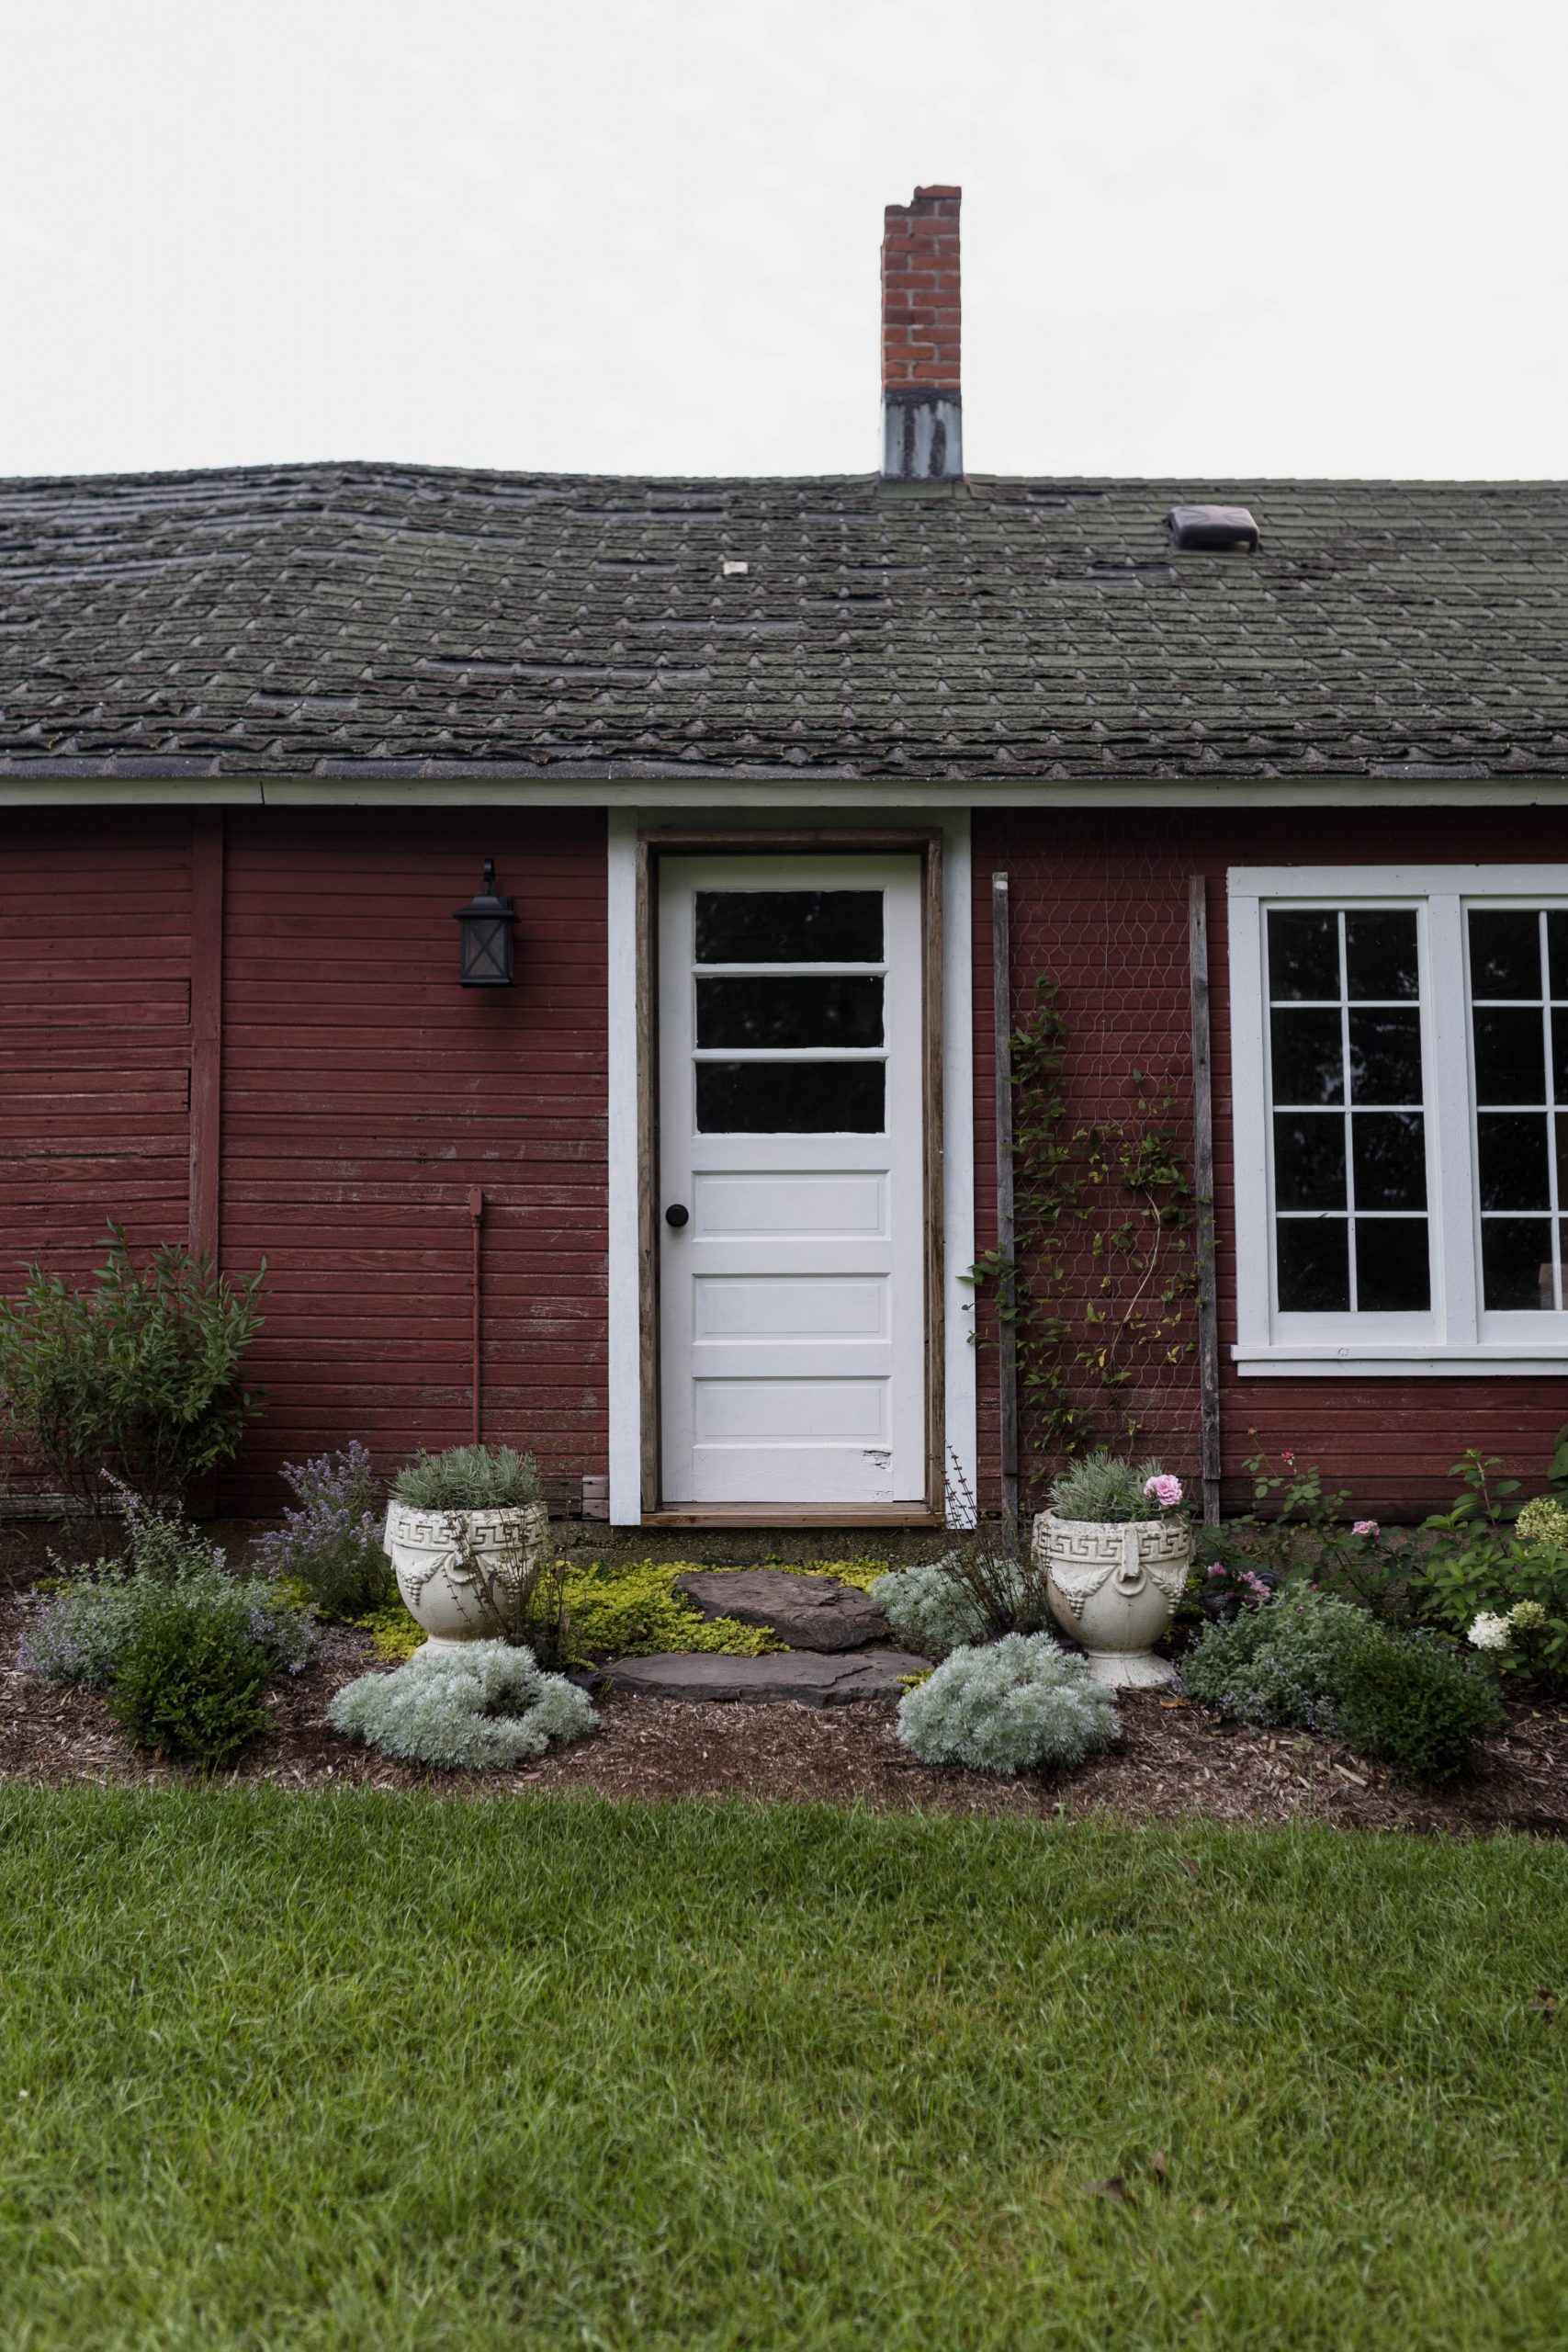 Vintage decorated historic Michigan Farm with cement urns